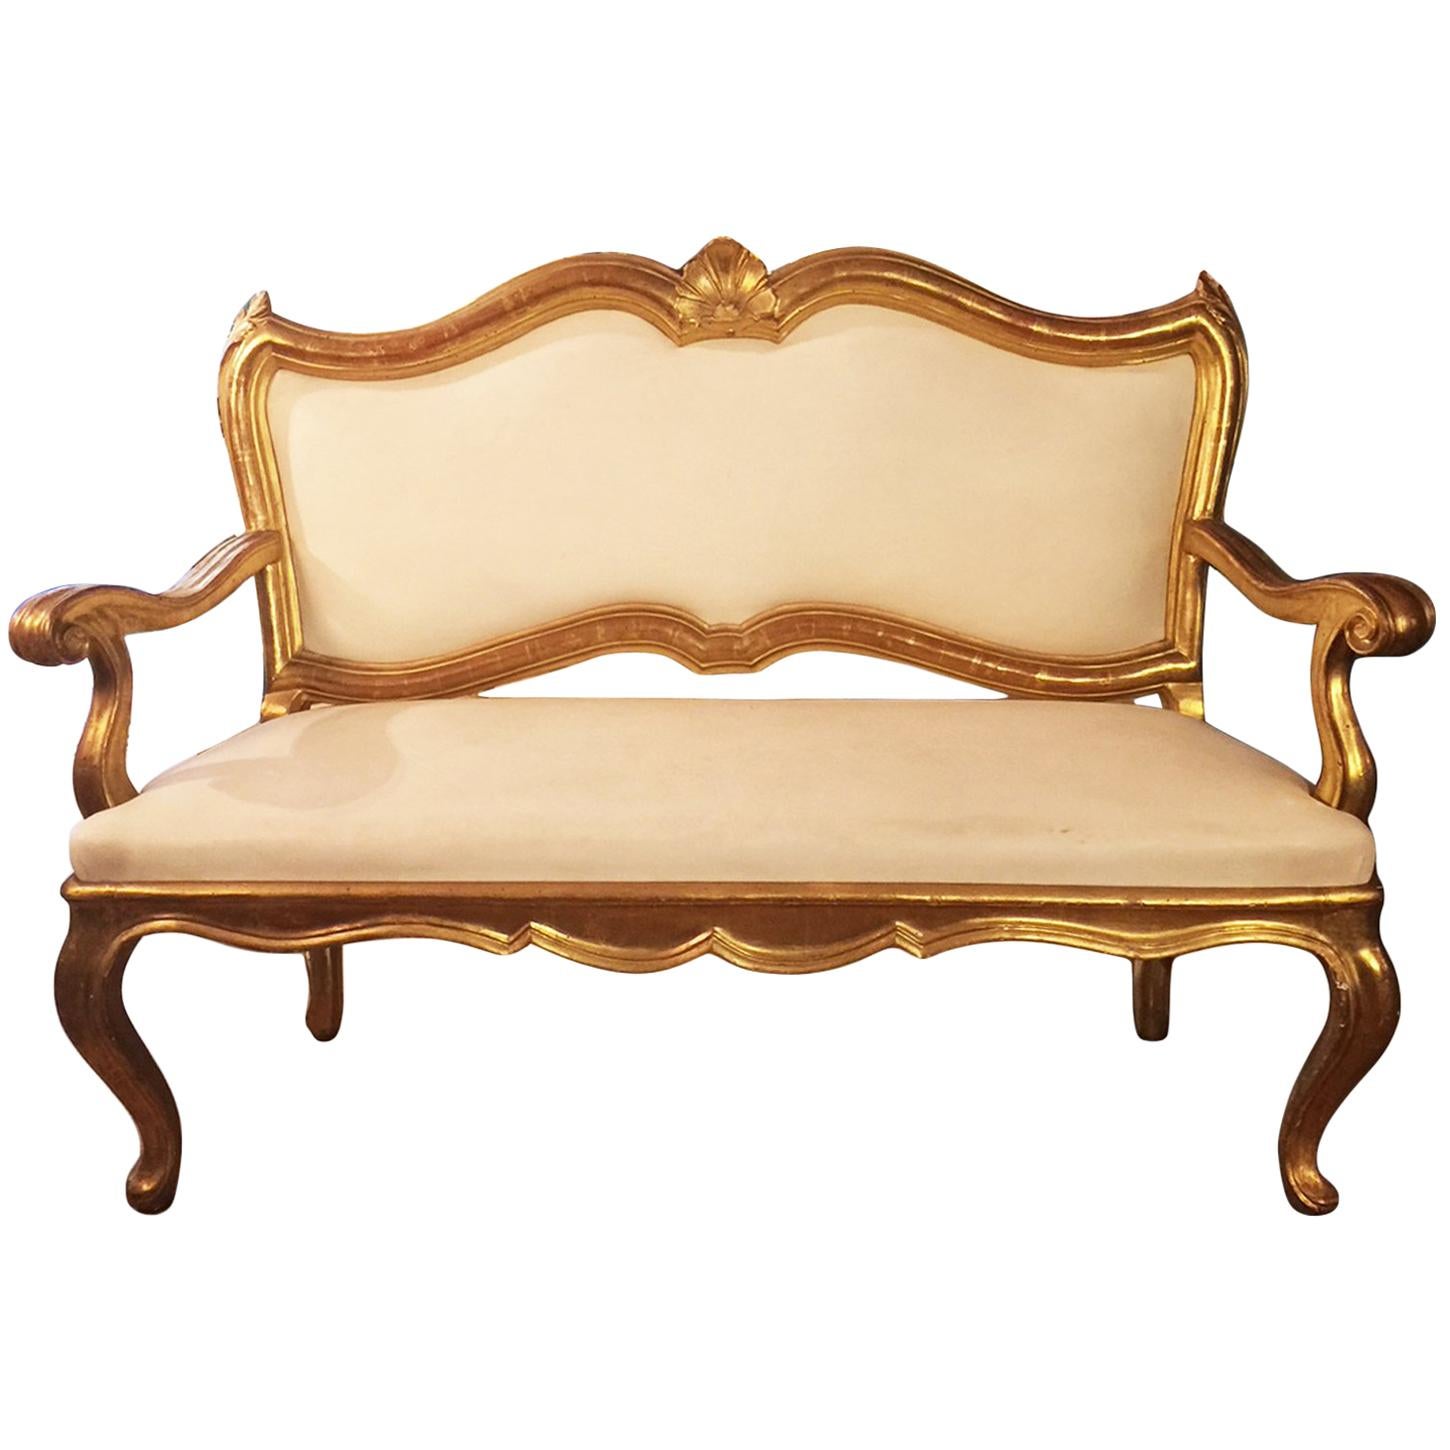 Mid-18th Century Italian Louis XV Upholstered Carved Giltwood Sofa or Canapé For Sale